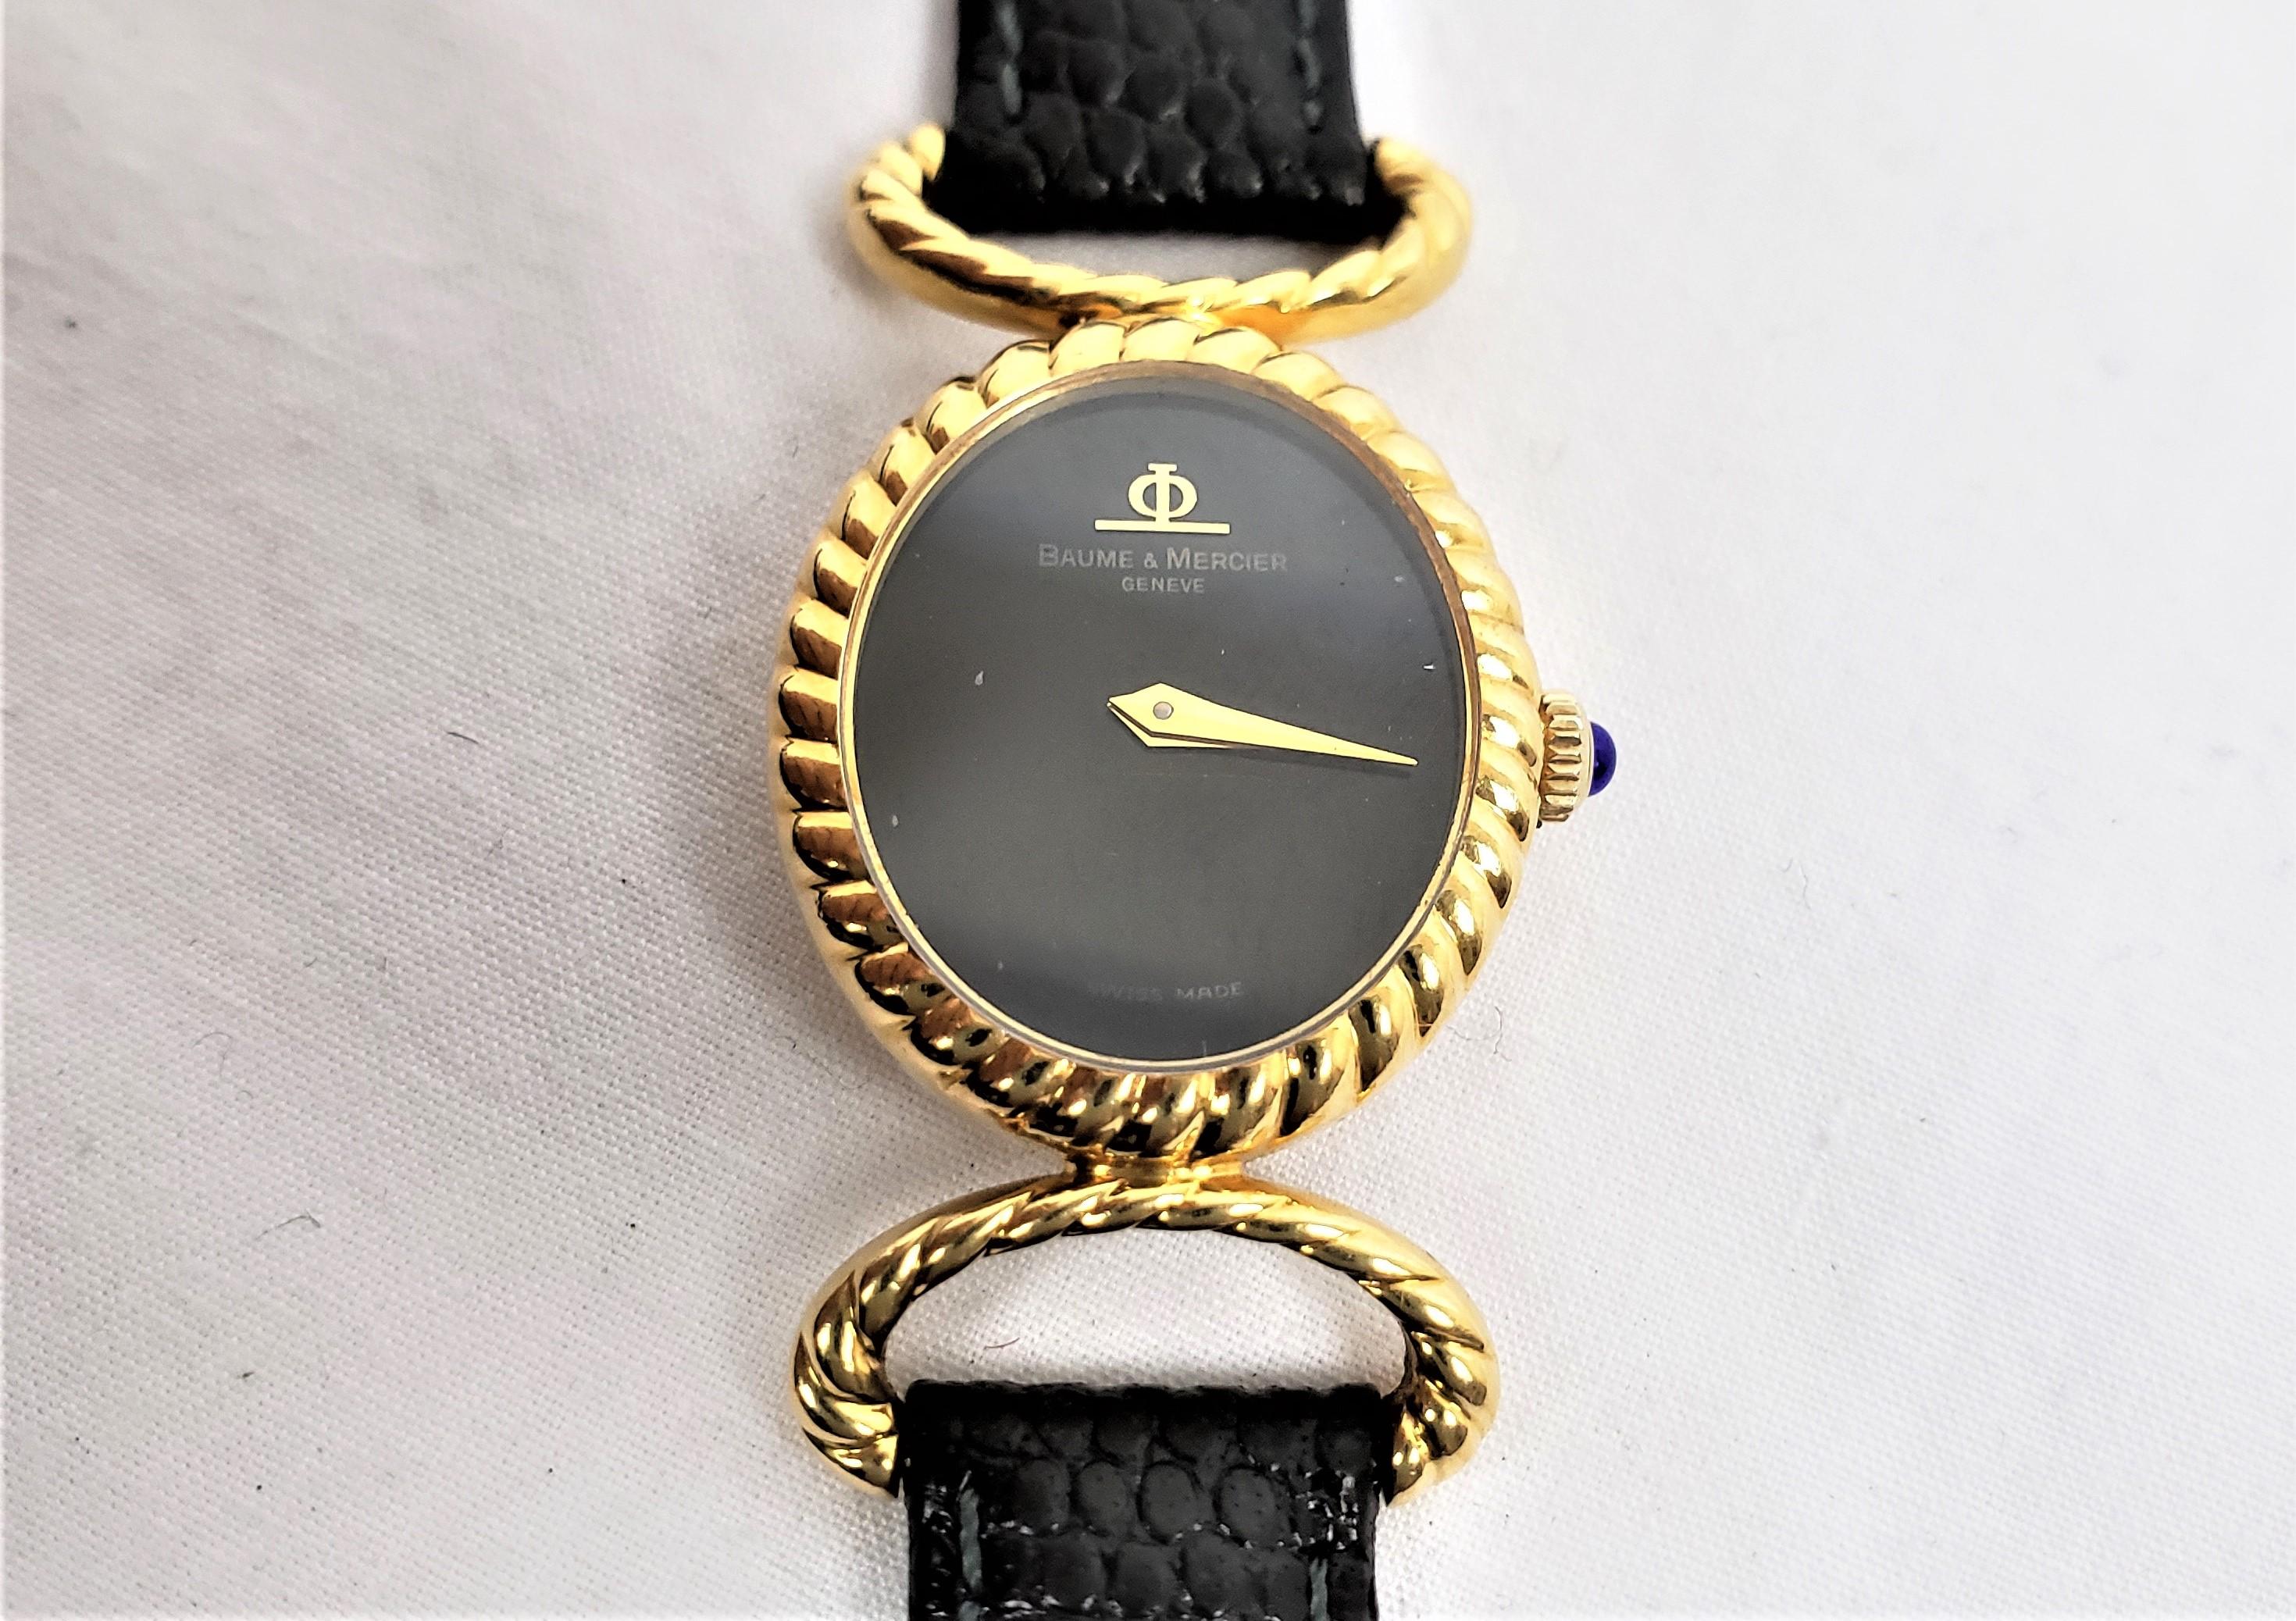 This ladies wristwatch was made by the well known Baume et Mercier of Switzerland in approximately 1970 in their period Mid-Century style. The watch and lugs are composed of eighteen karat yellow gold. The watch face is done in with a black face and